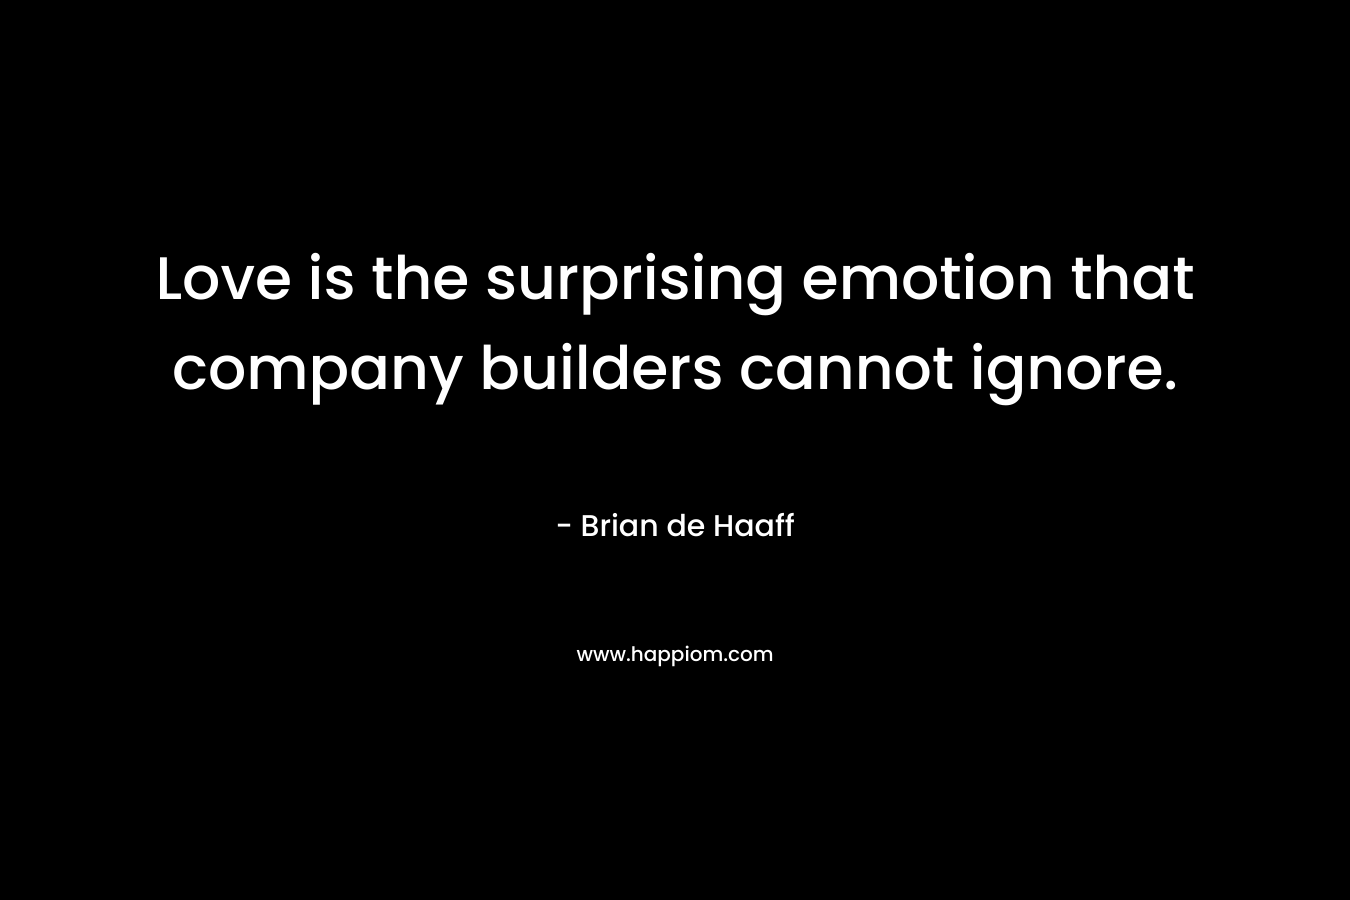 Love is the surprising emotion that company builders cannot ignore.